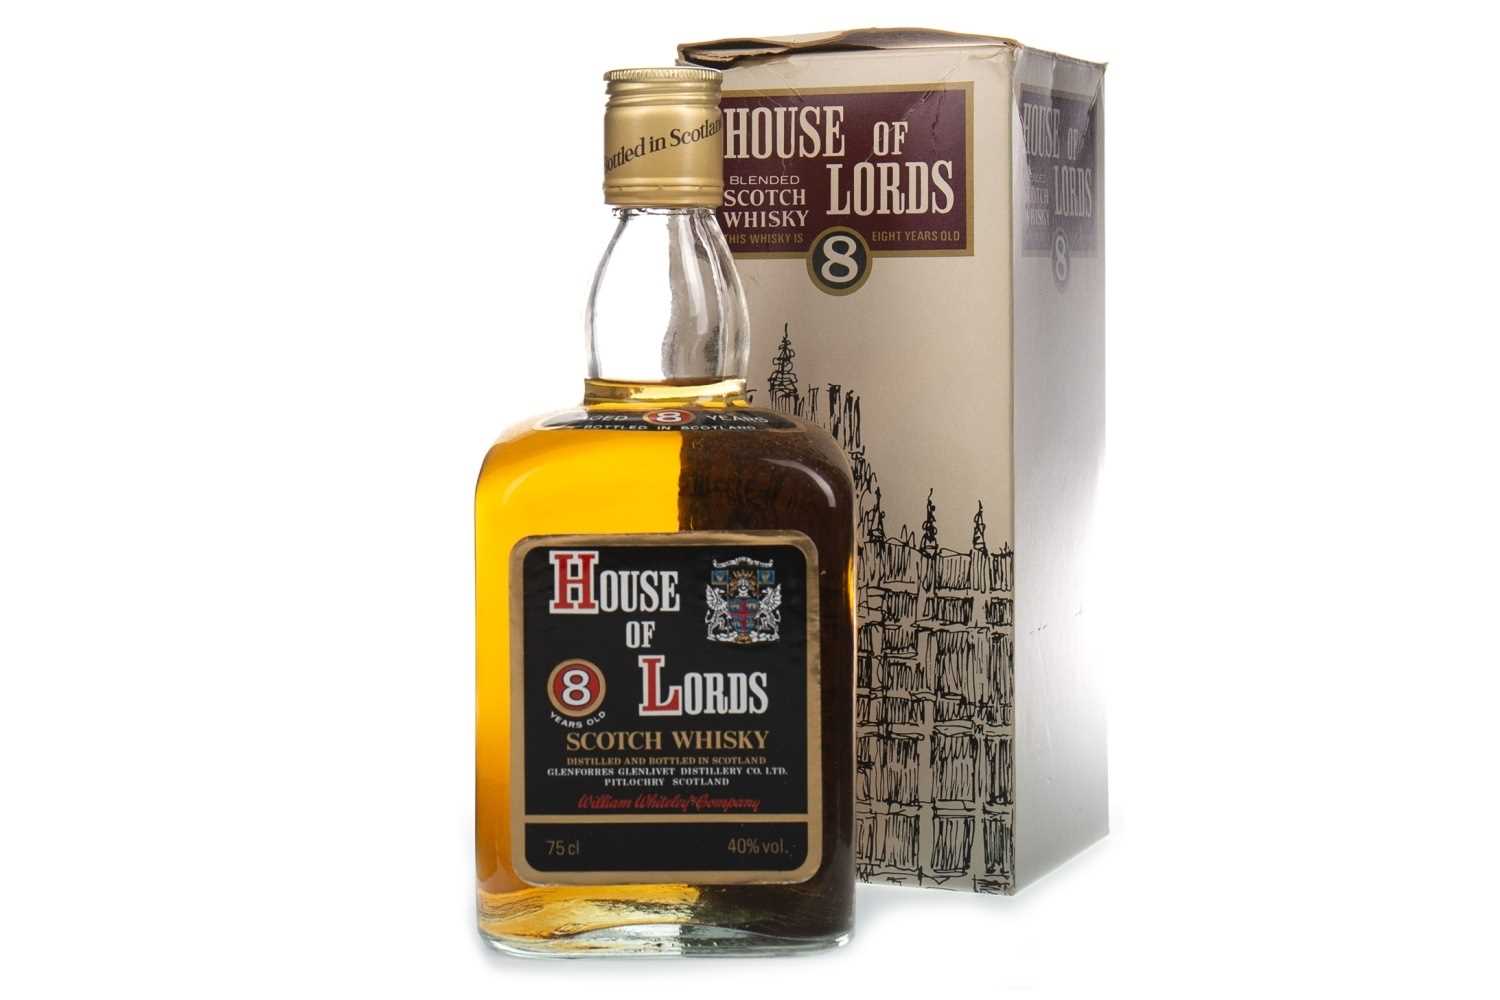 Lot 410 - HOUSE OF LORDS 8 YEARS OLD